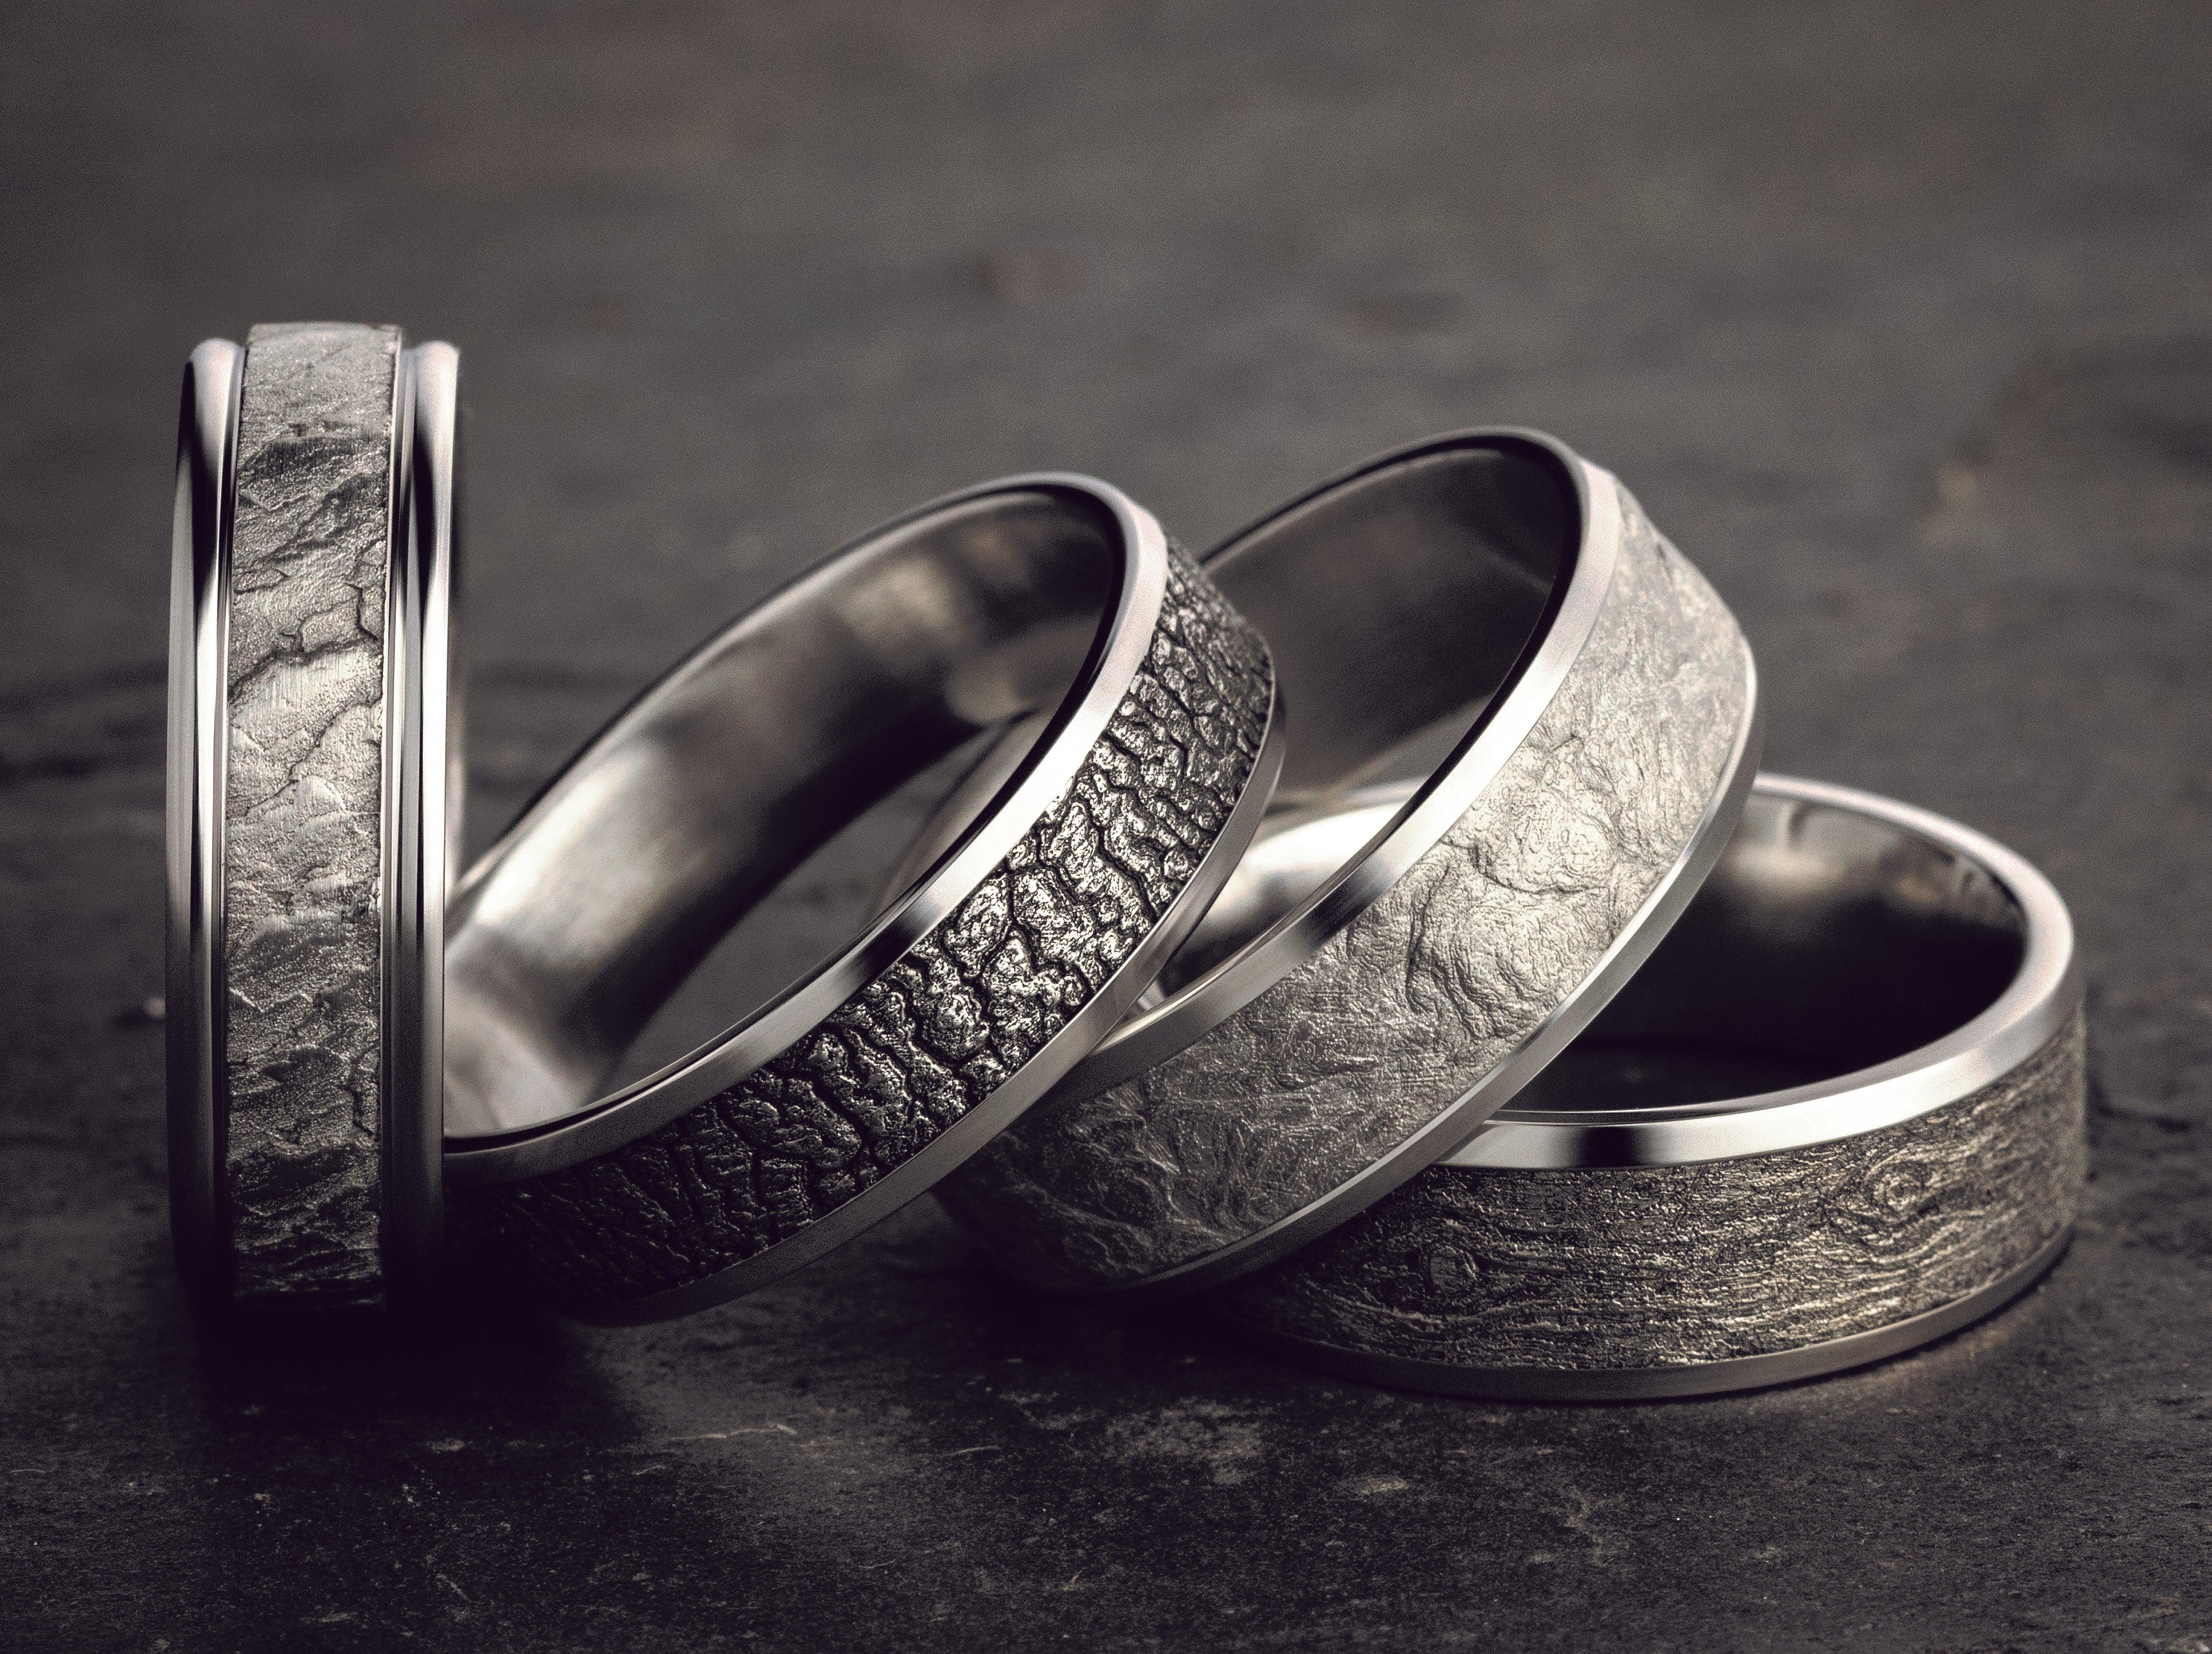 What are The Pros and Cons of Ring Metals?